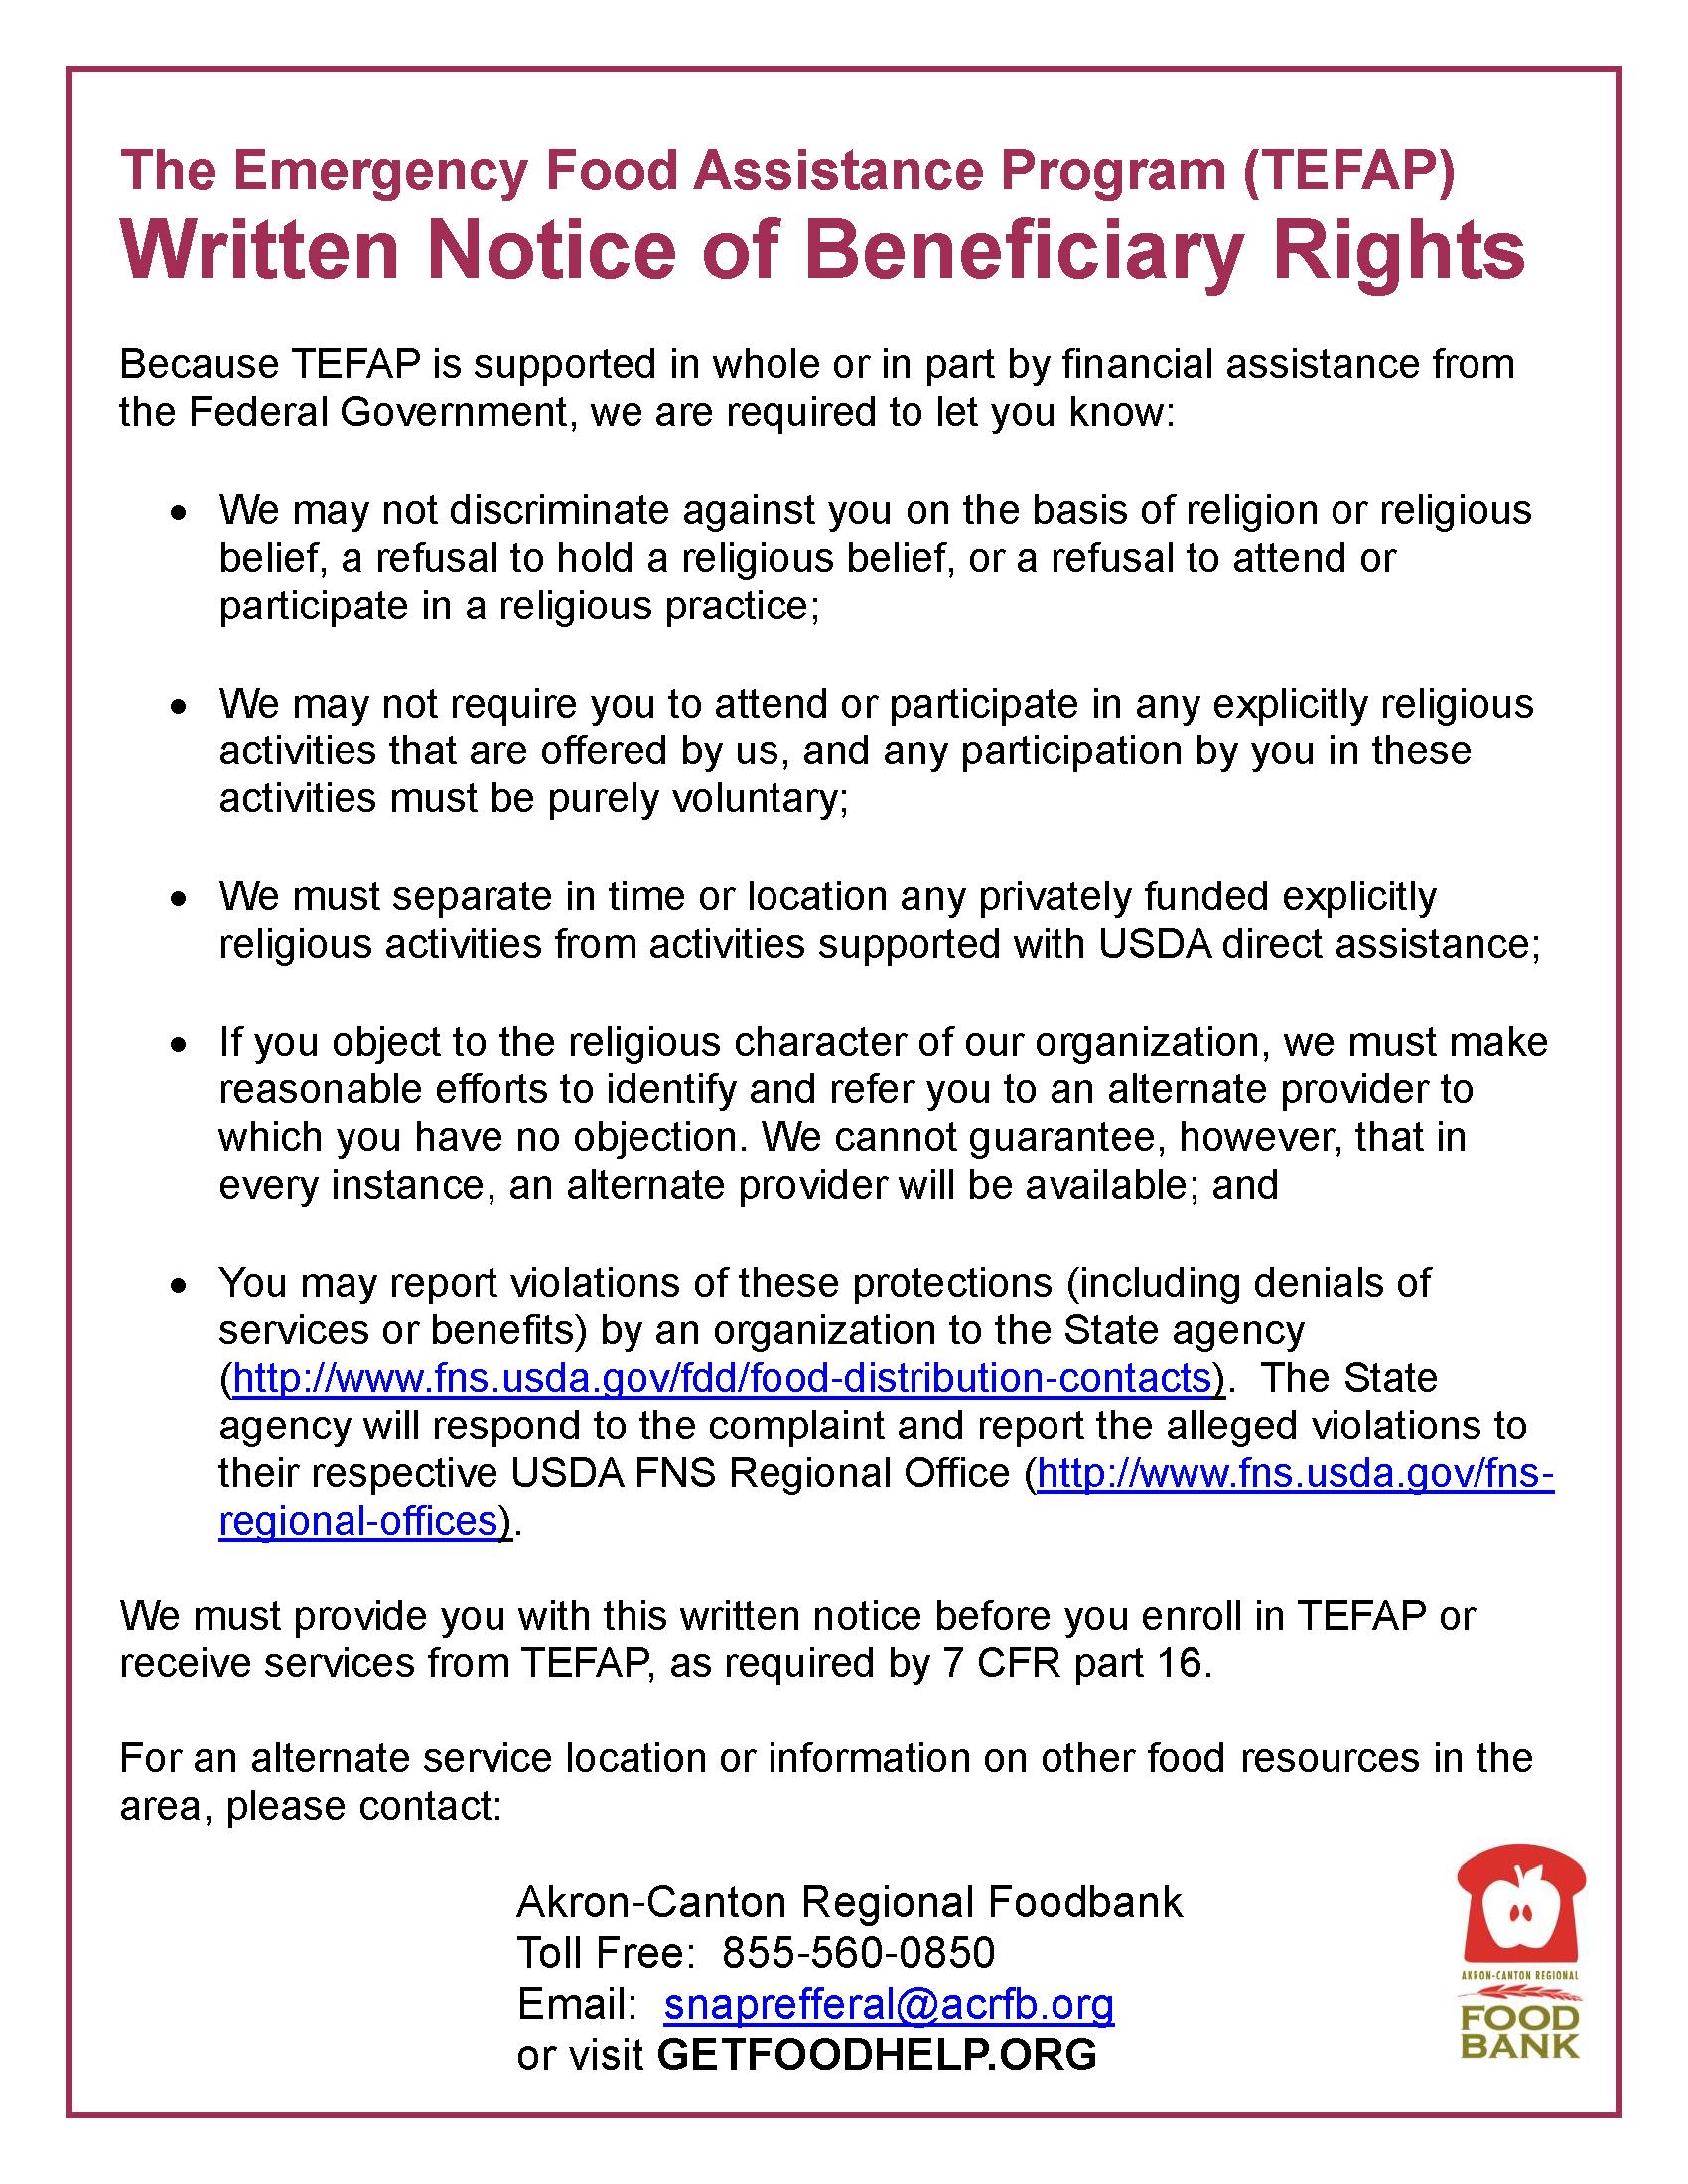 Written Notice of Beneficiary Rights